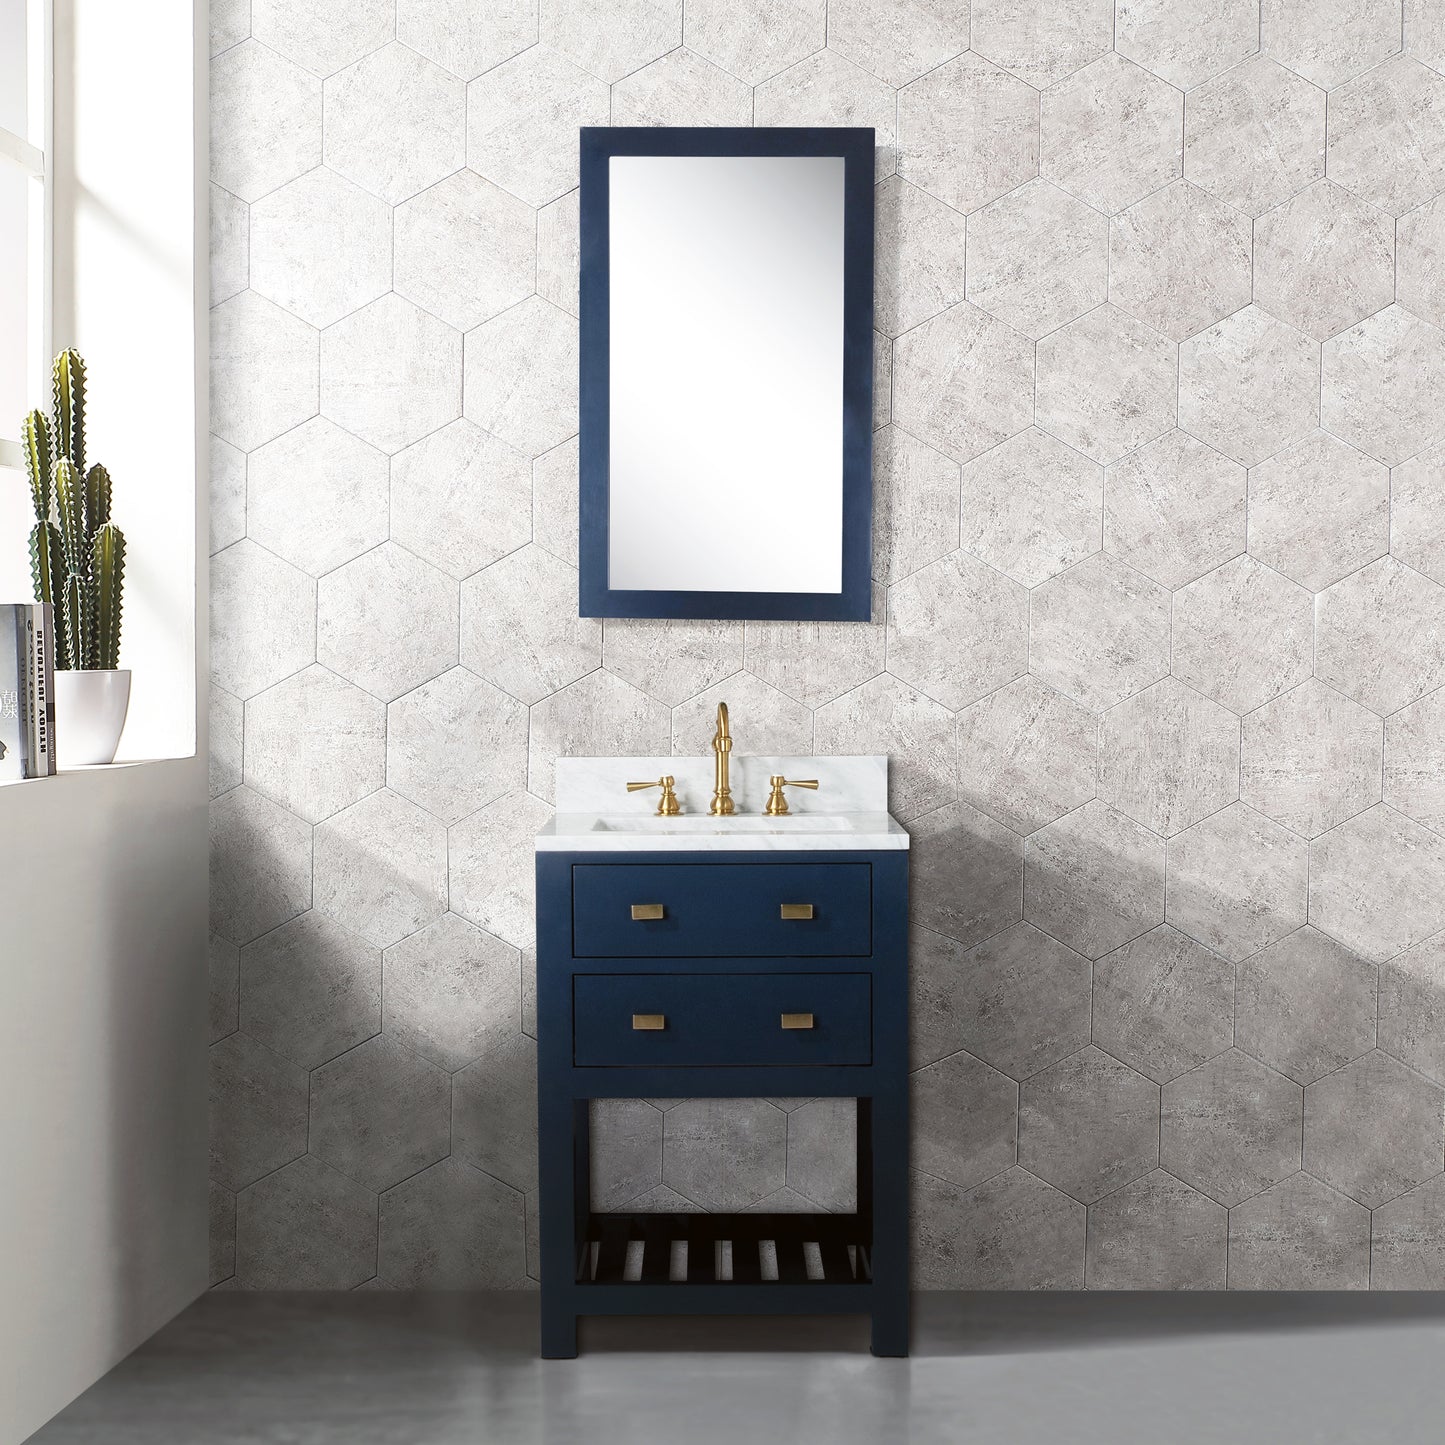 Water Creation 24 Inch Single Sink Bathroom Vanity With F2-0012 Faucet And Mirror From The Madalyn Collection - Luxe Bathroom Vanities